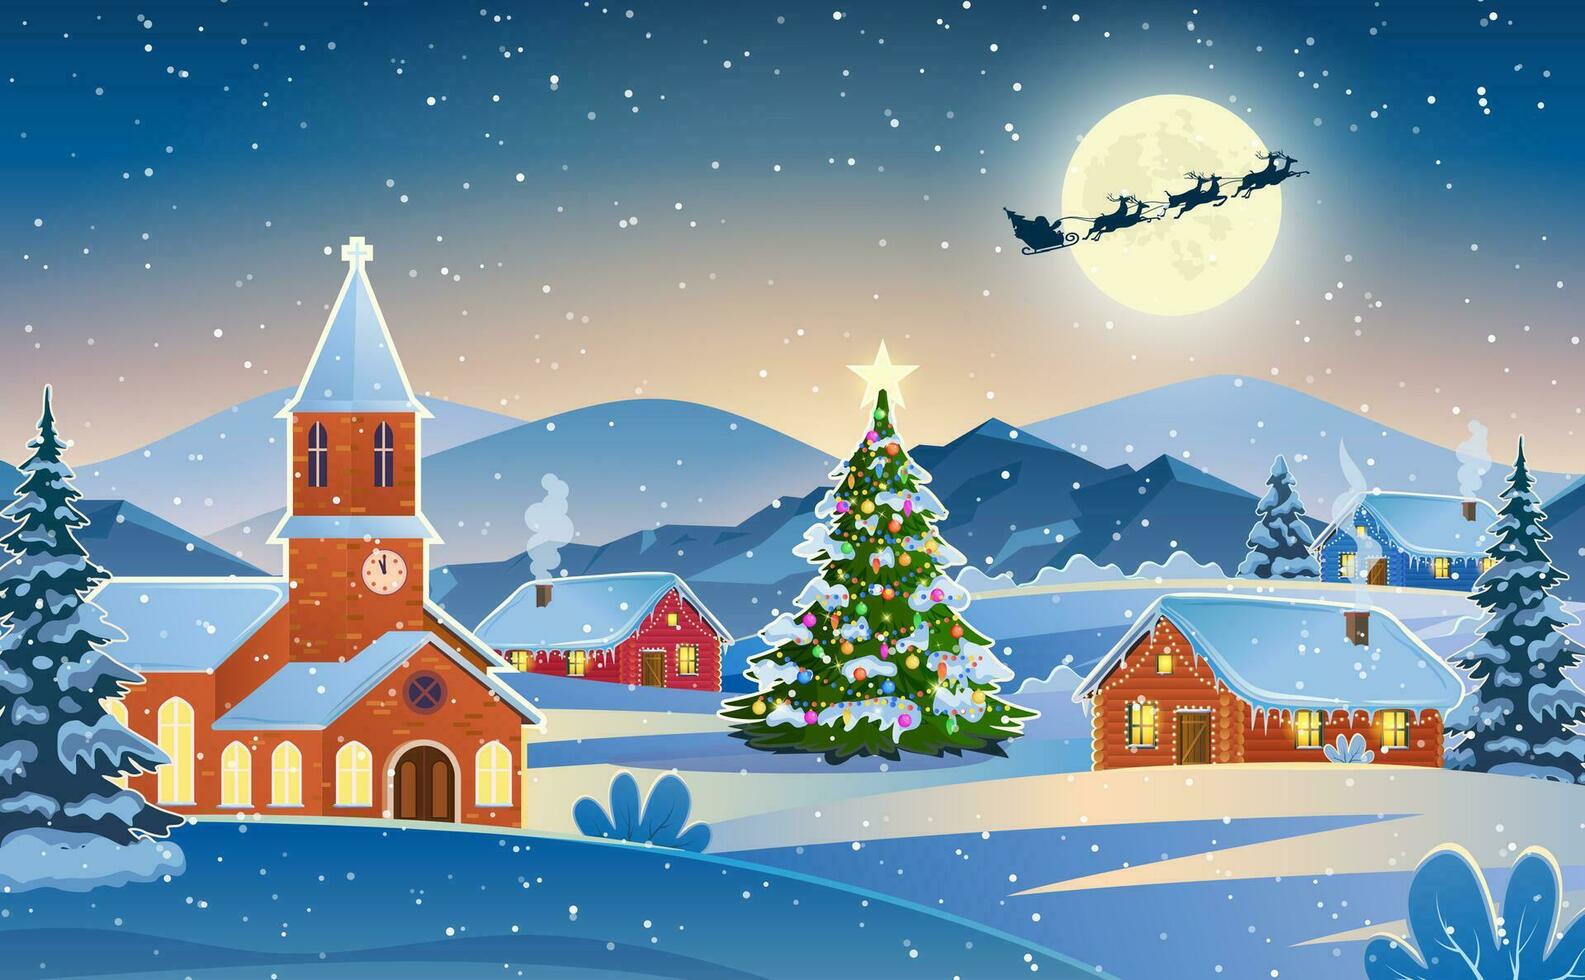 Winter snow landscape and houses with christmas tree. concept for greeting or postal card. background with moon and the silhouette of Santa Claus flying on a sleigh. vector illustration.